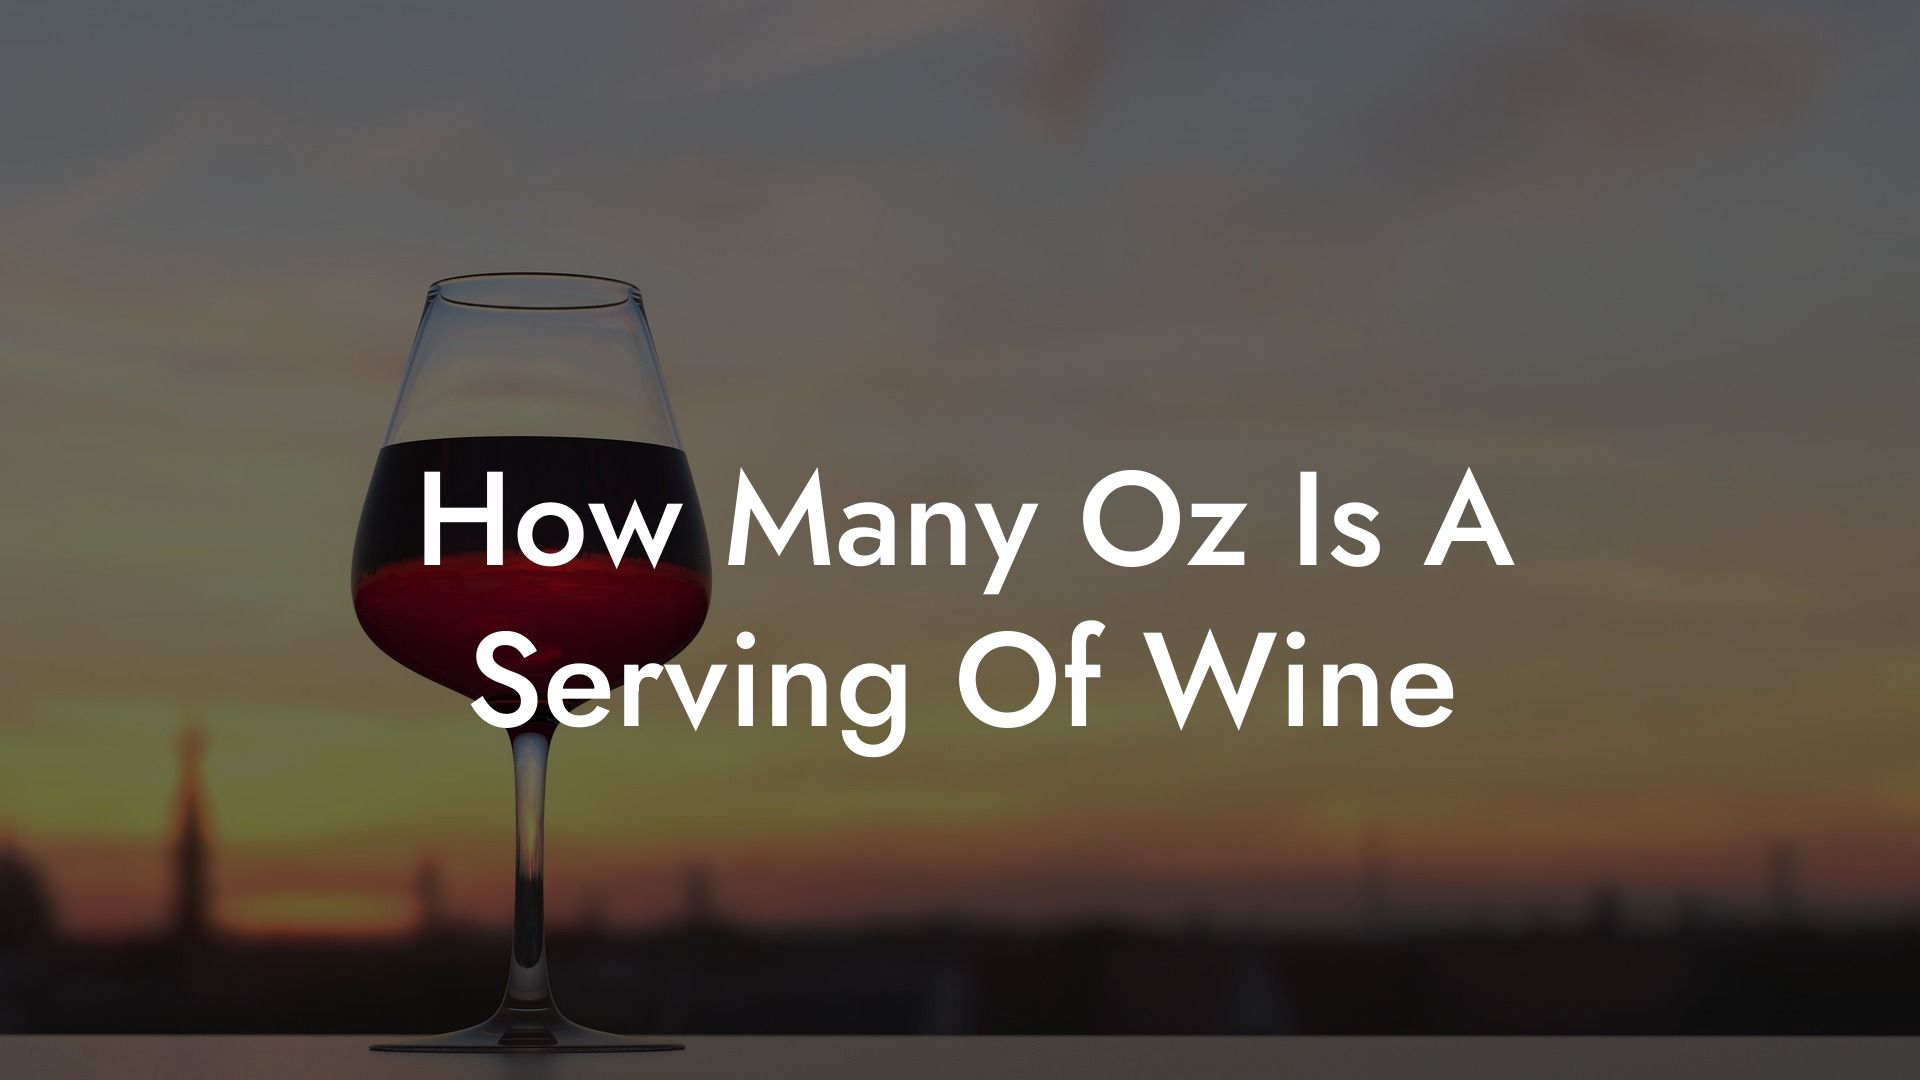 How Many Oz Is A Serving Of Wine